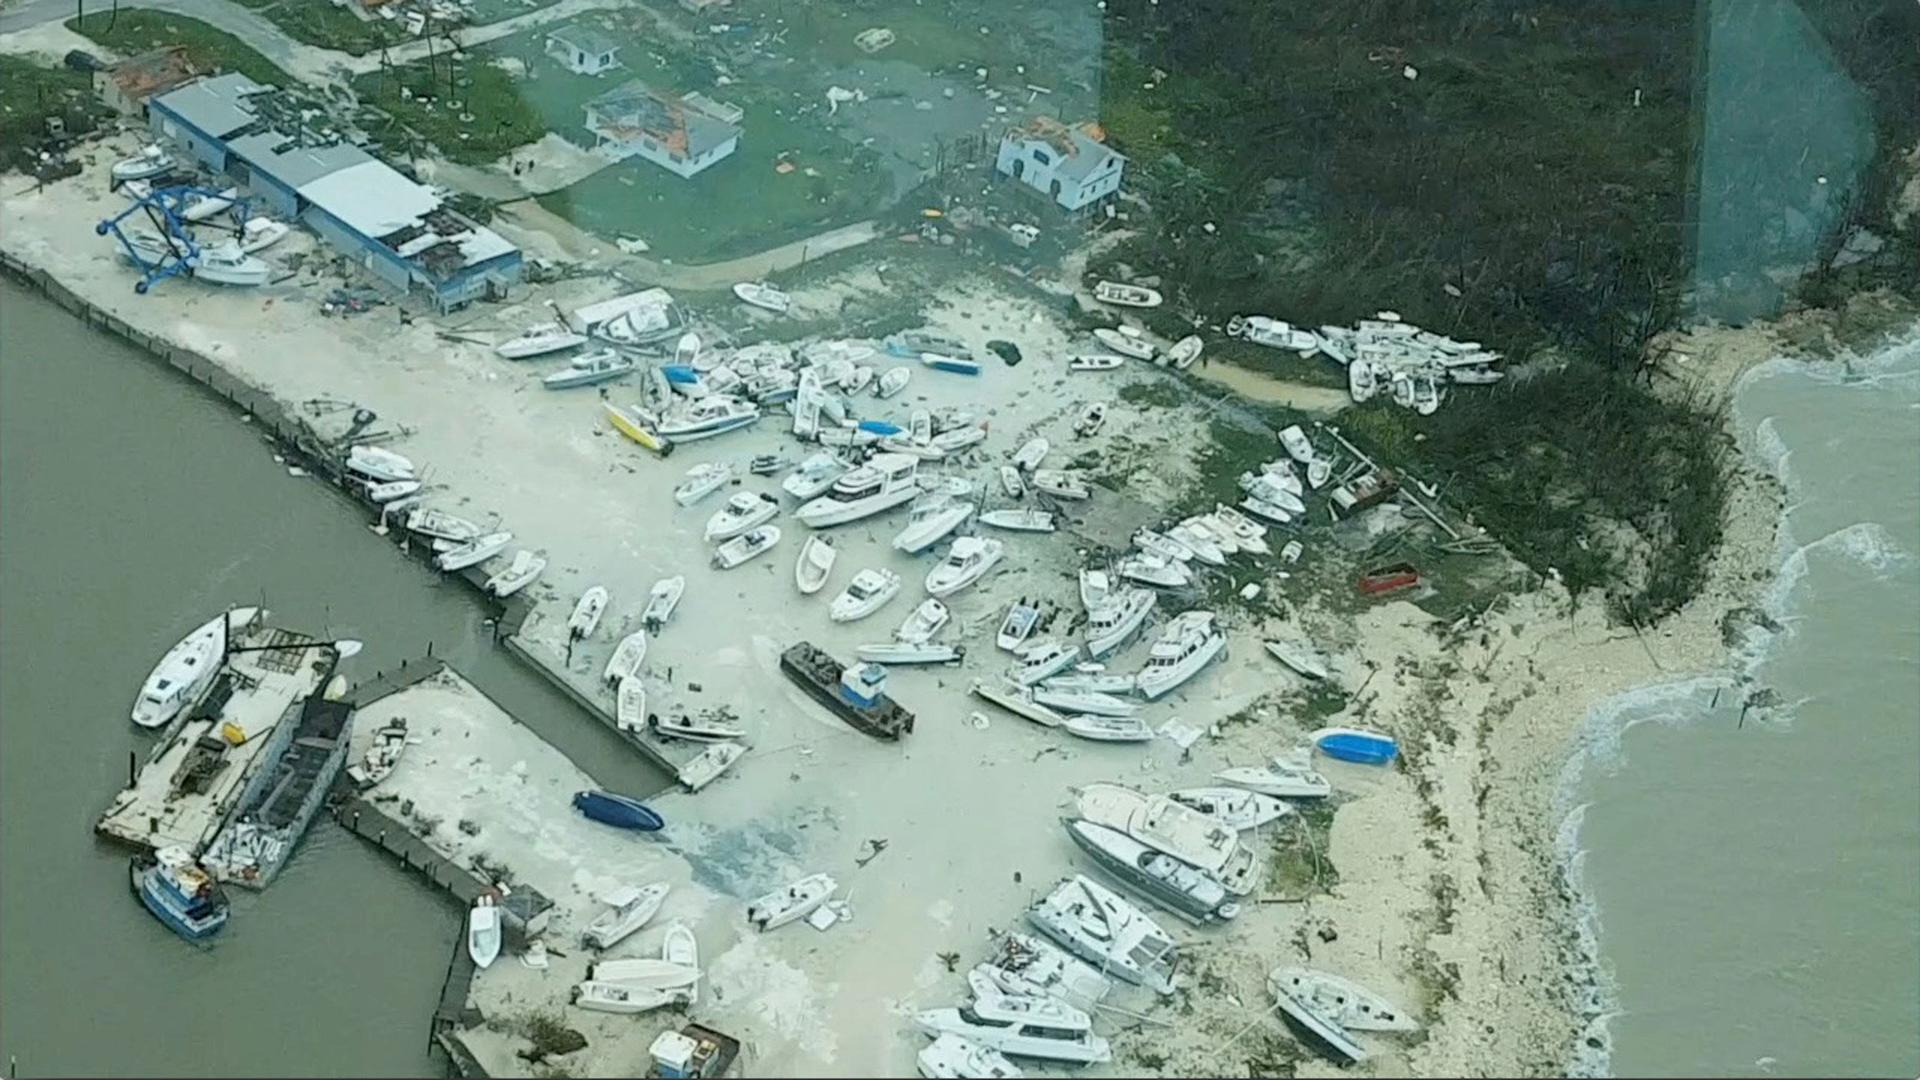 An aerial view shows boats damaged and washed ashore in the Bahamas after Huricane Dorian.